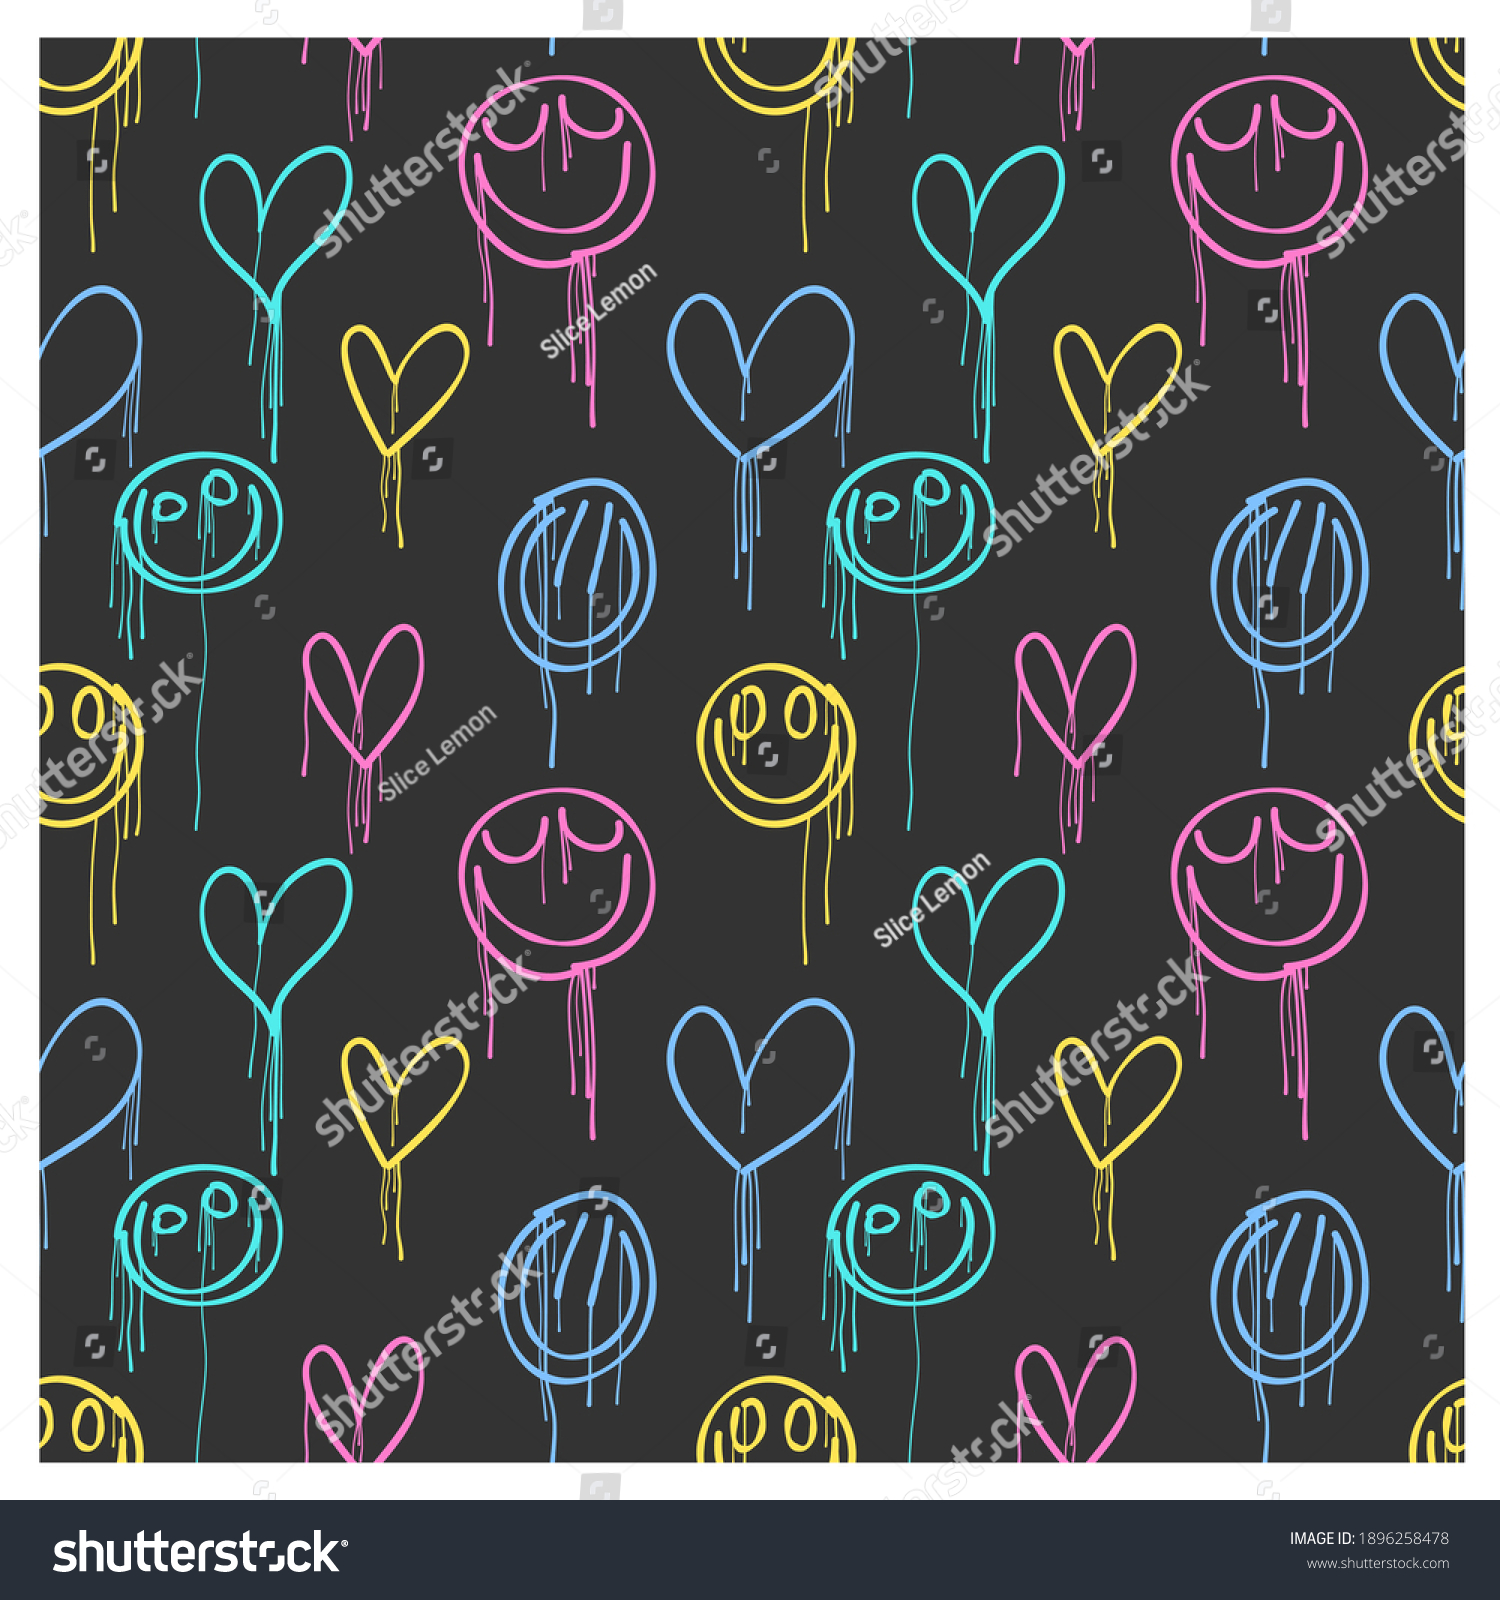 SVG of Seamless pattern of graffiti hearts and smiles with smudges. Image for a poster or cover. Vector illustration. Repeating texture. Figure for textiles. svg